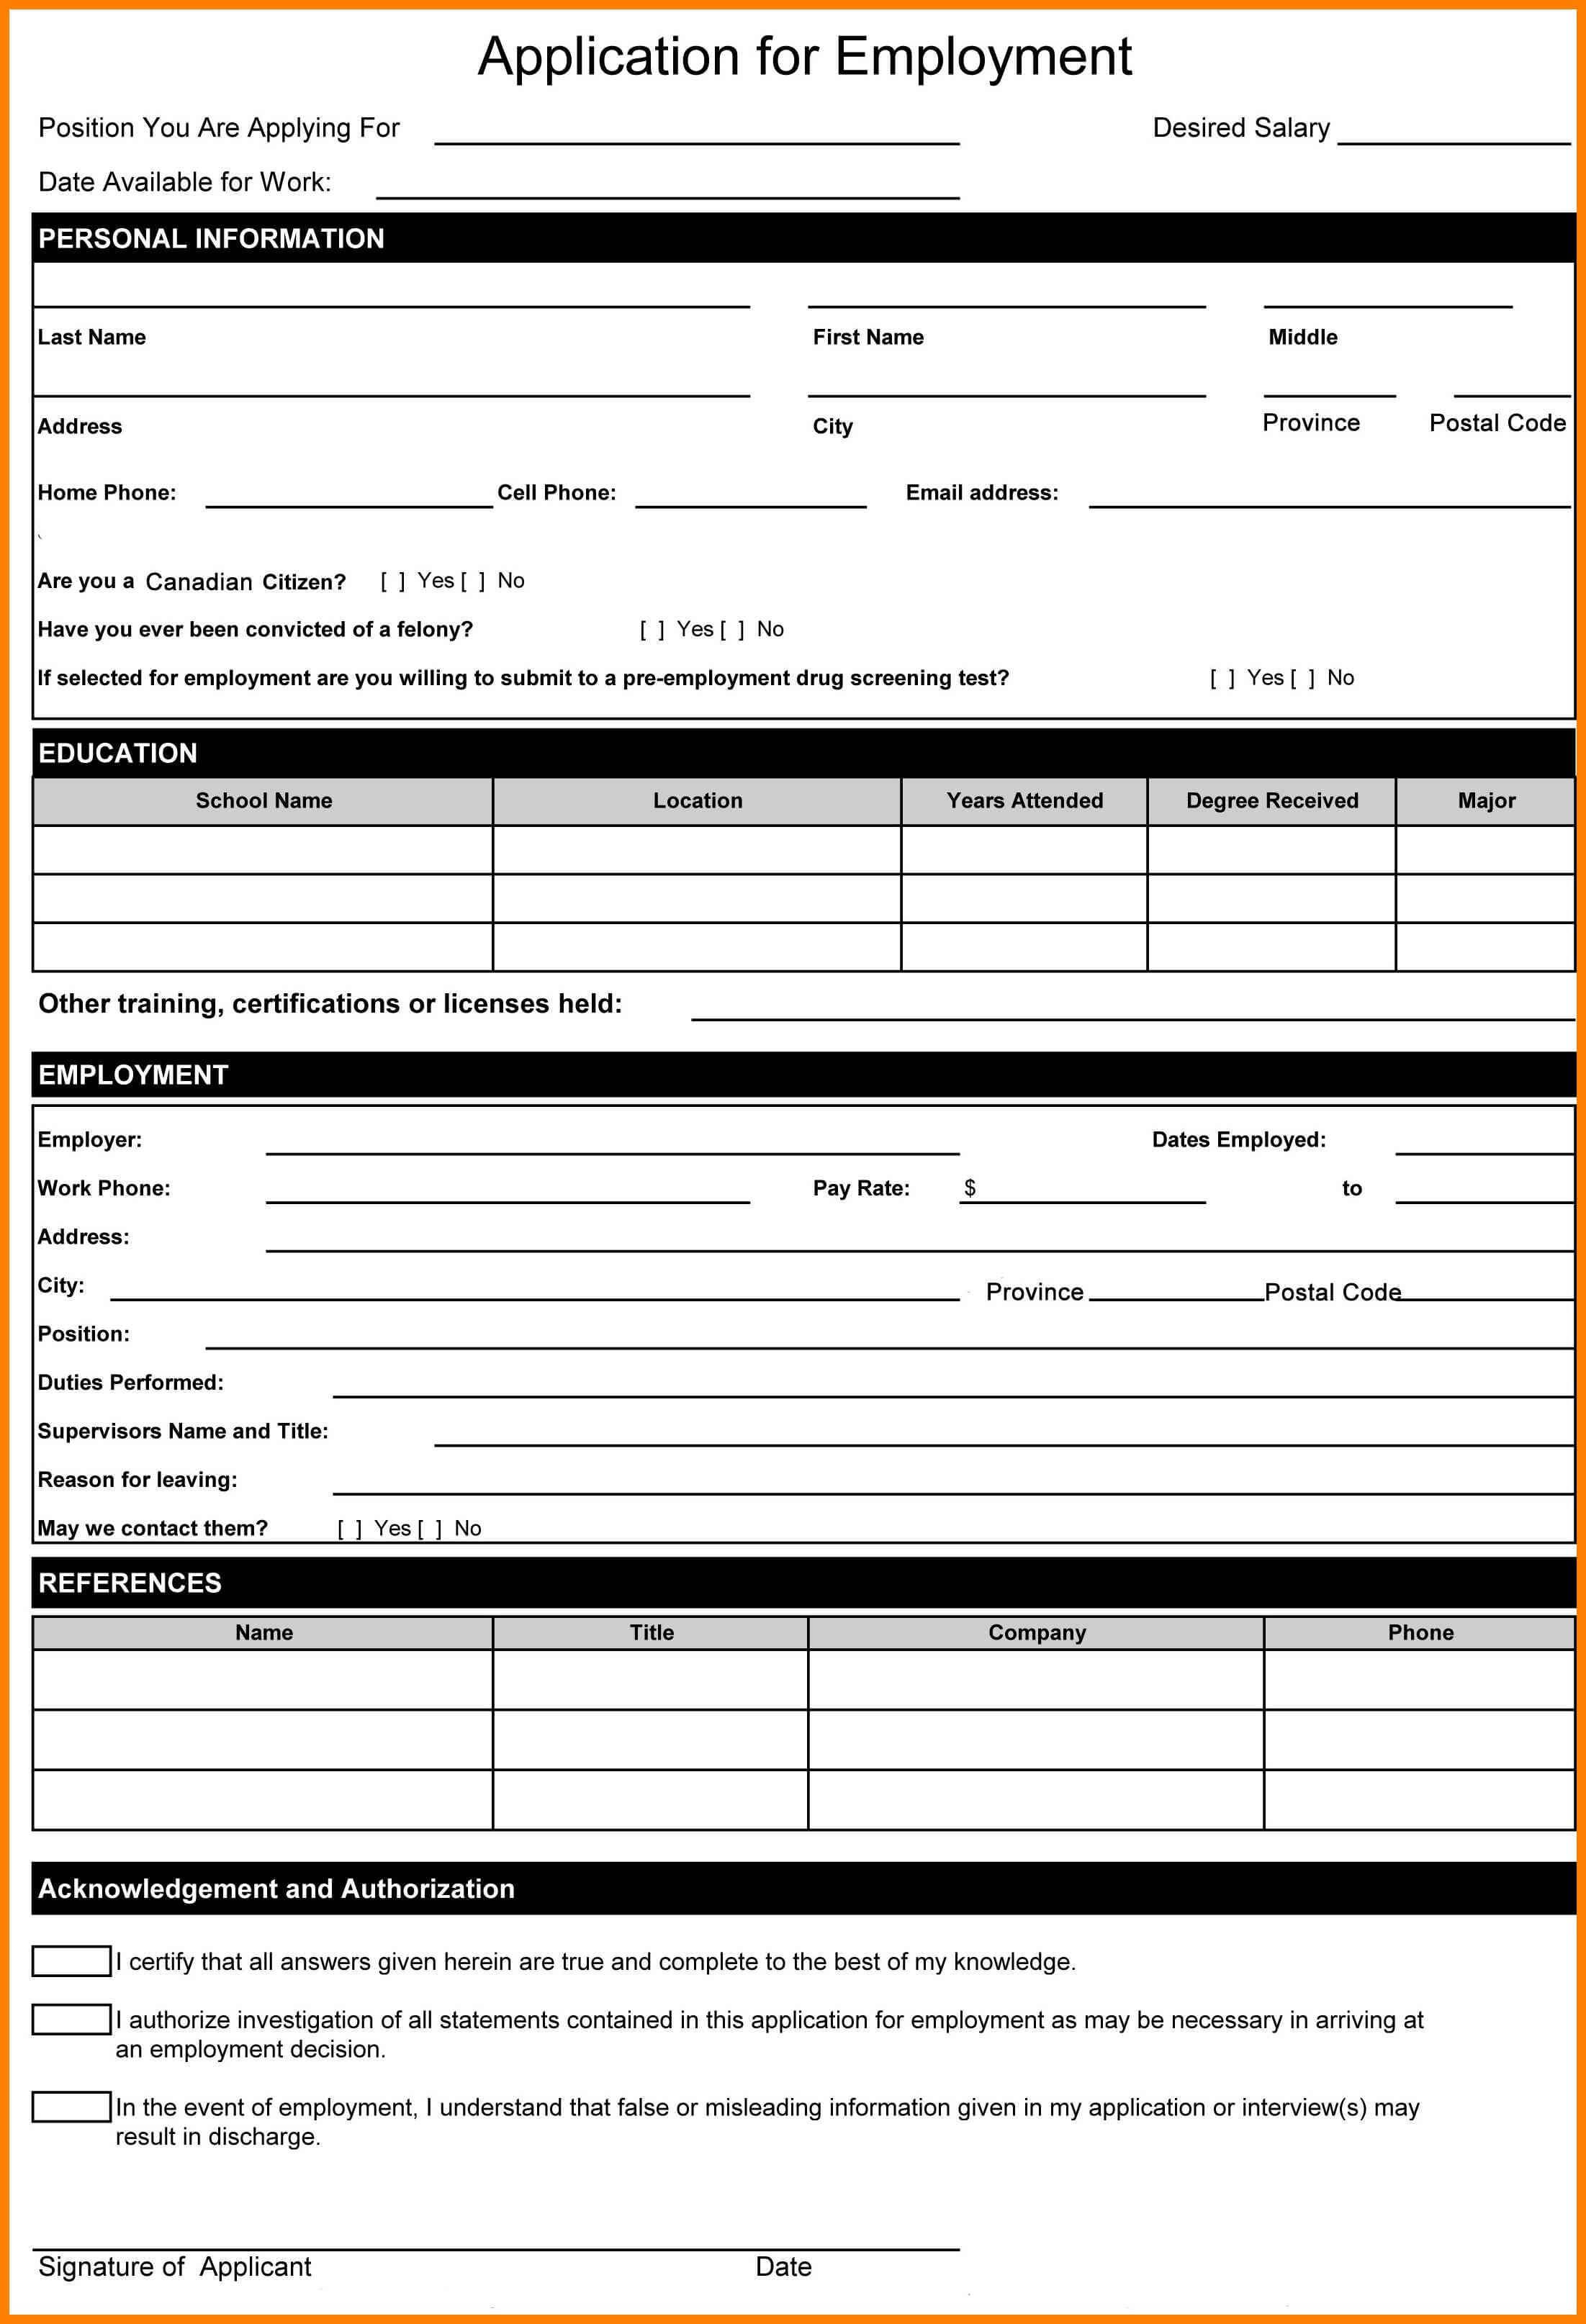 Biodata Sample Form Applicants Forms Templates Word Basic Throughout Job Application Template Word